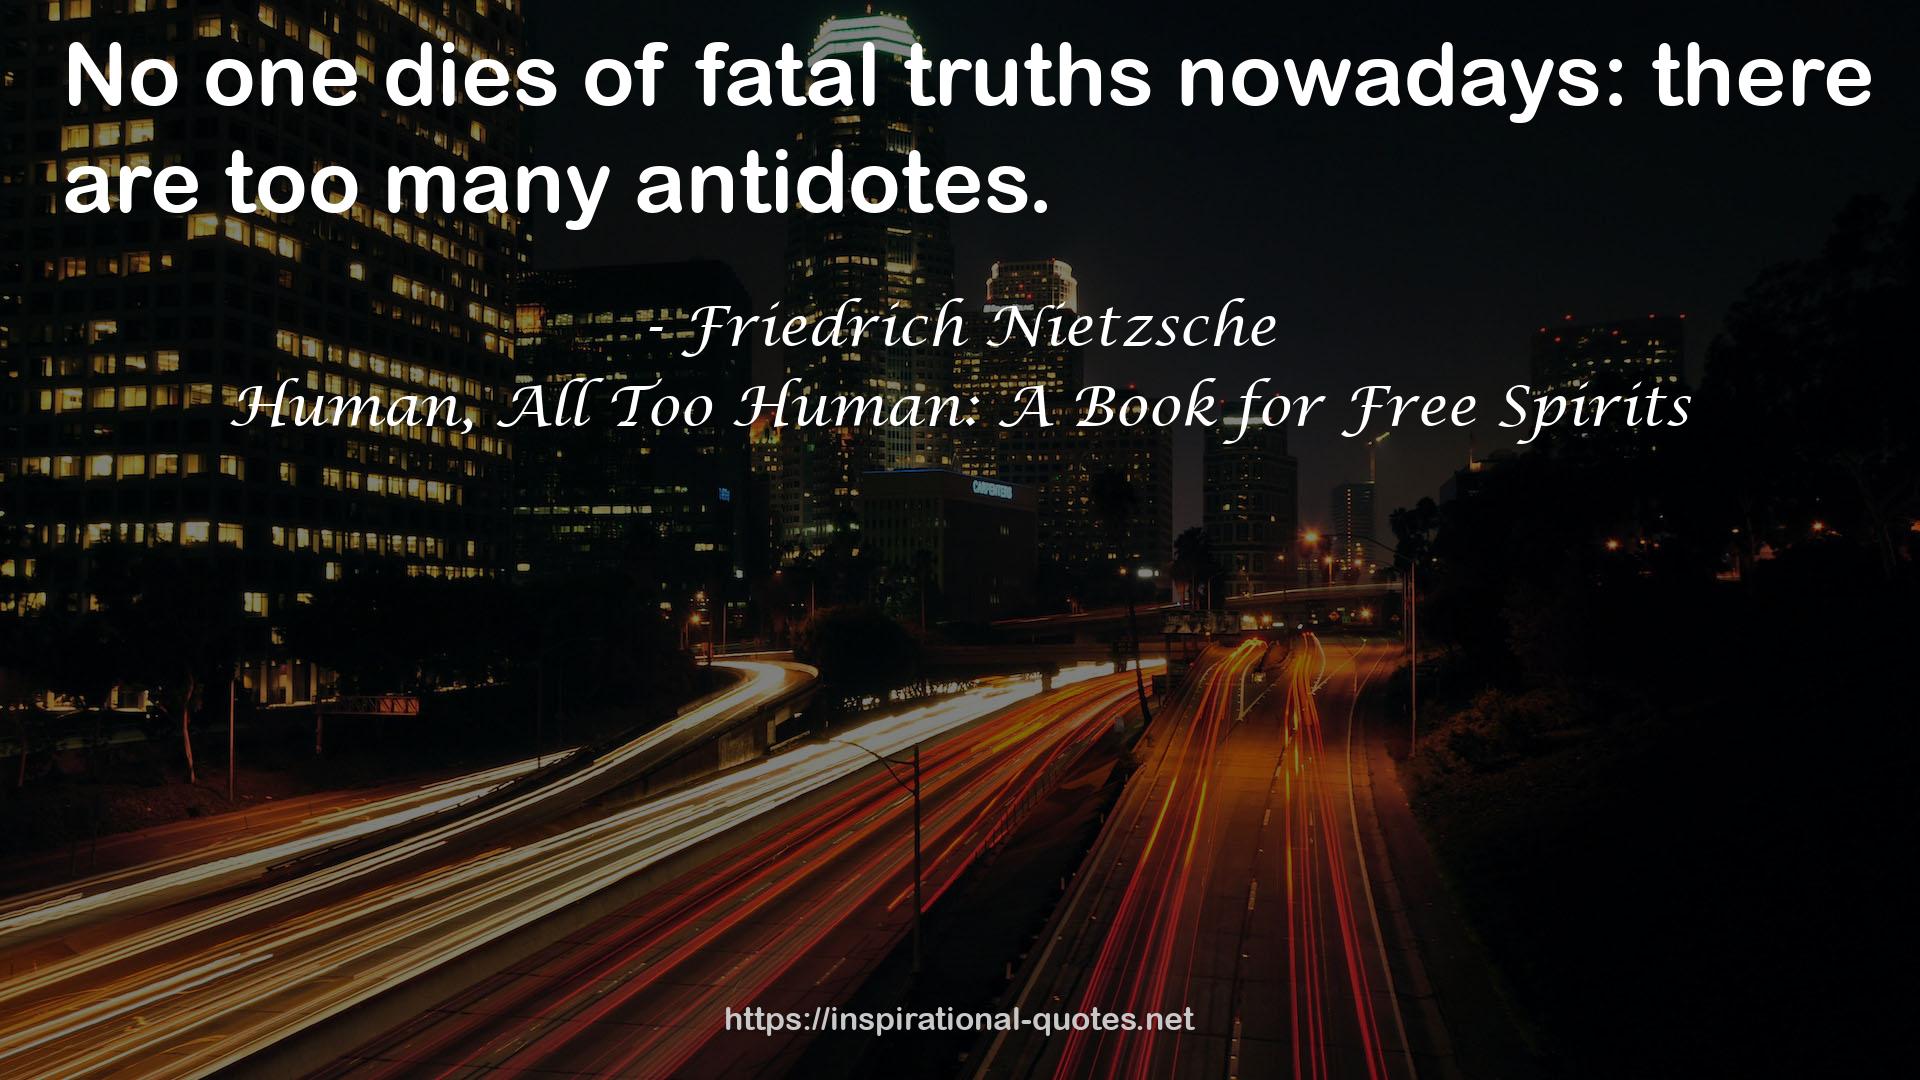 Human, All Too Human: A Book for Free Spirits QUOTES